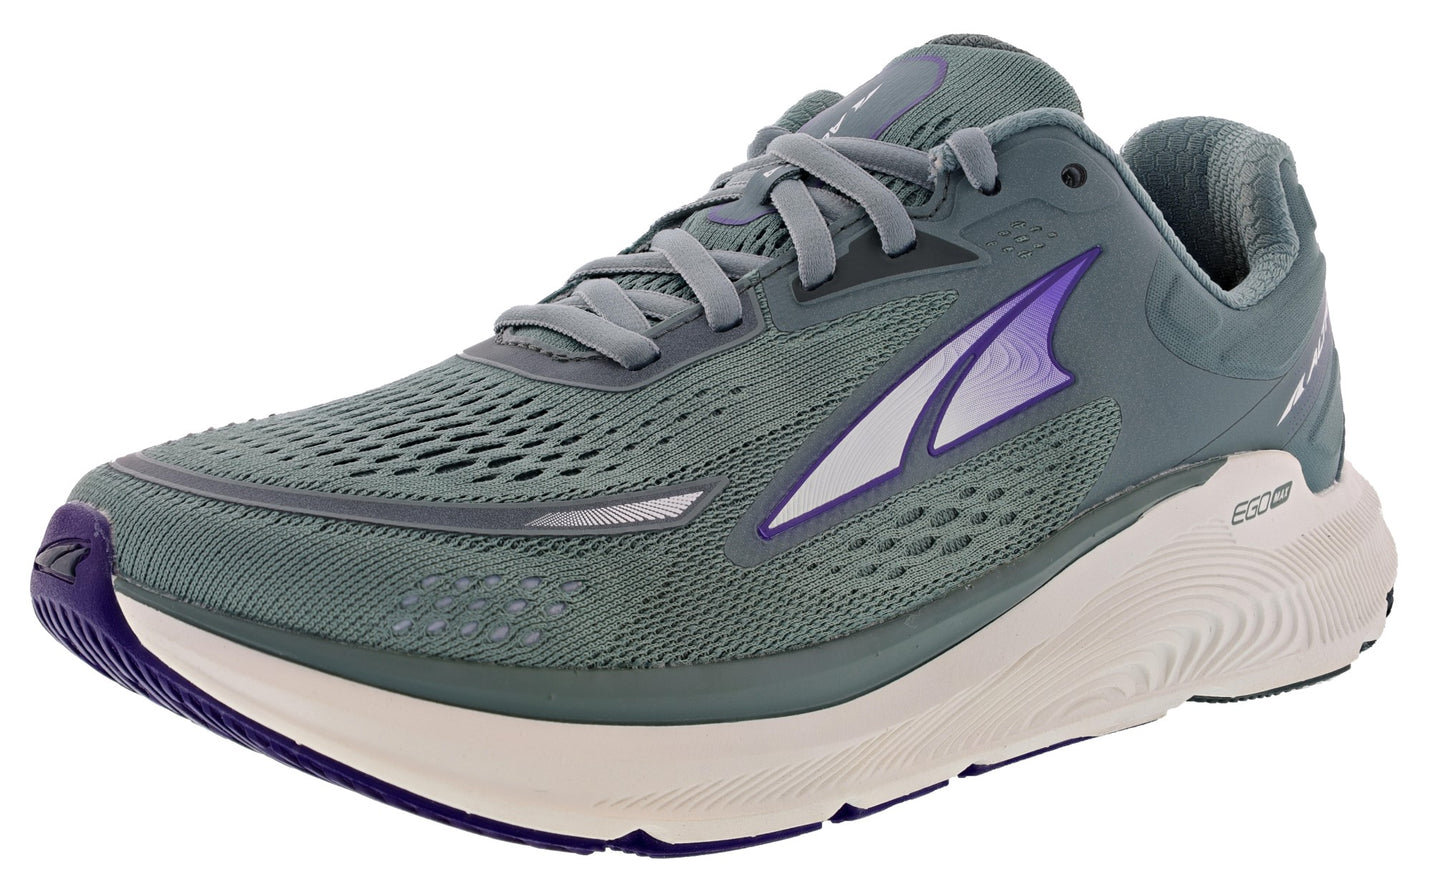 Lateral of Gray/Purple Altra Women's Paradigm 6 Trainer Running Shoes